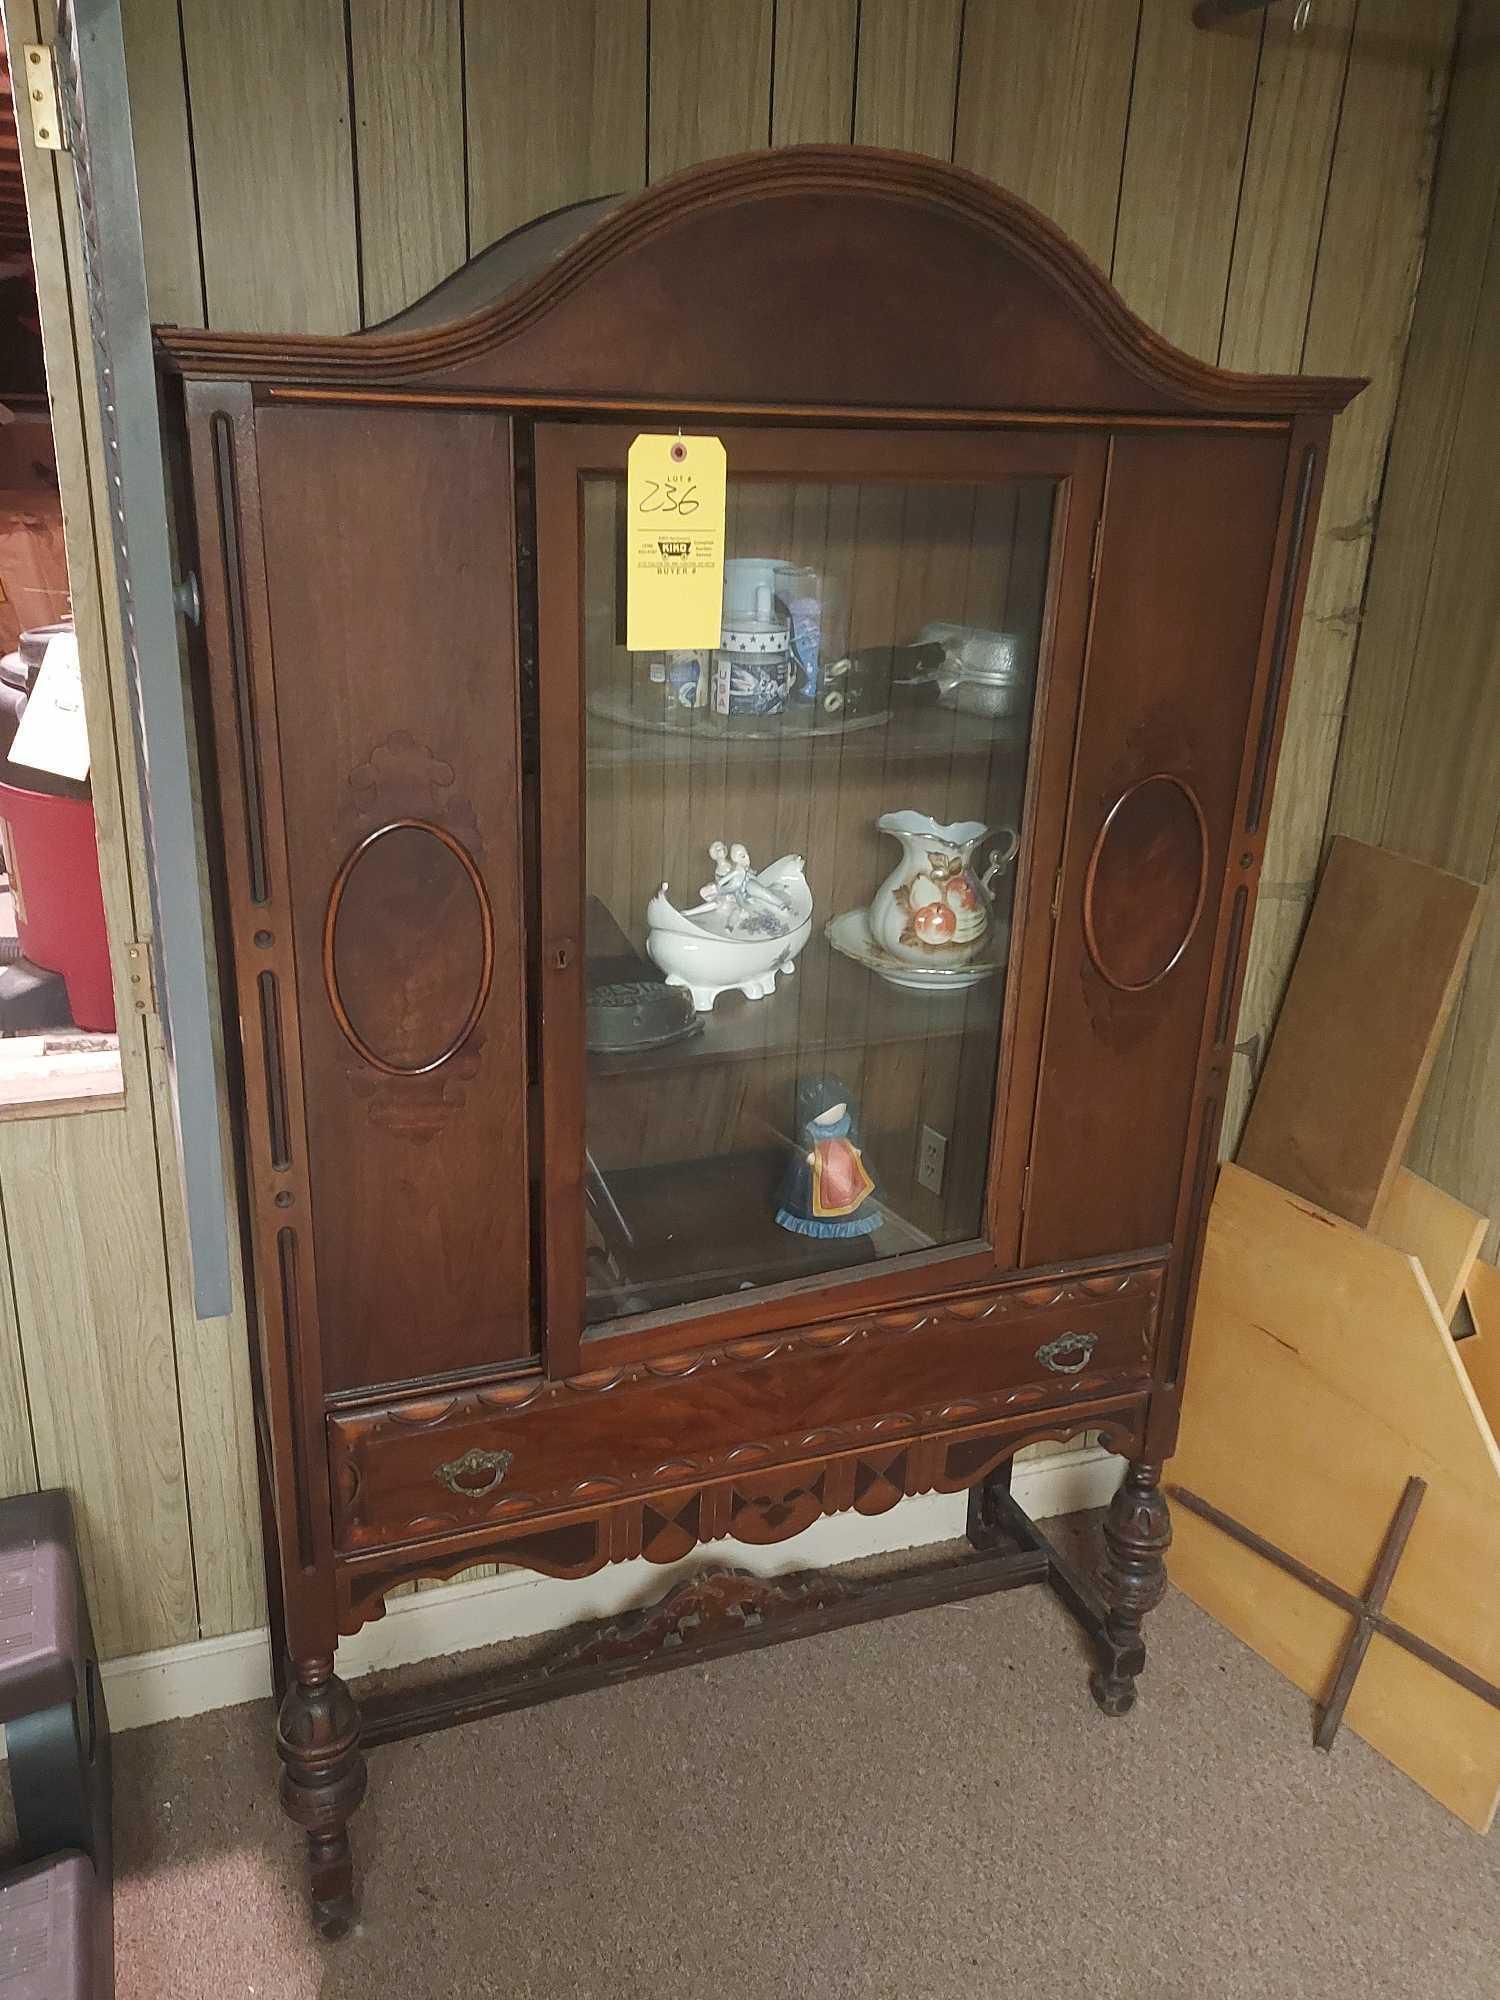 Ornate Carved China Cabinet & Contents